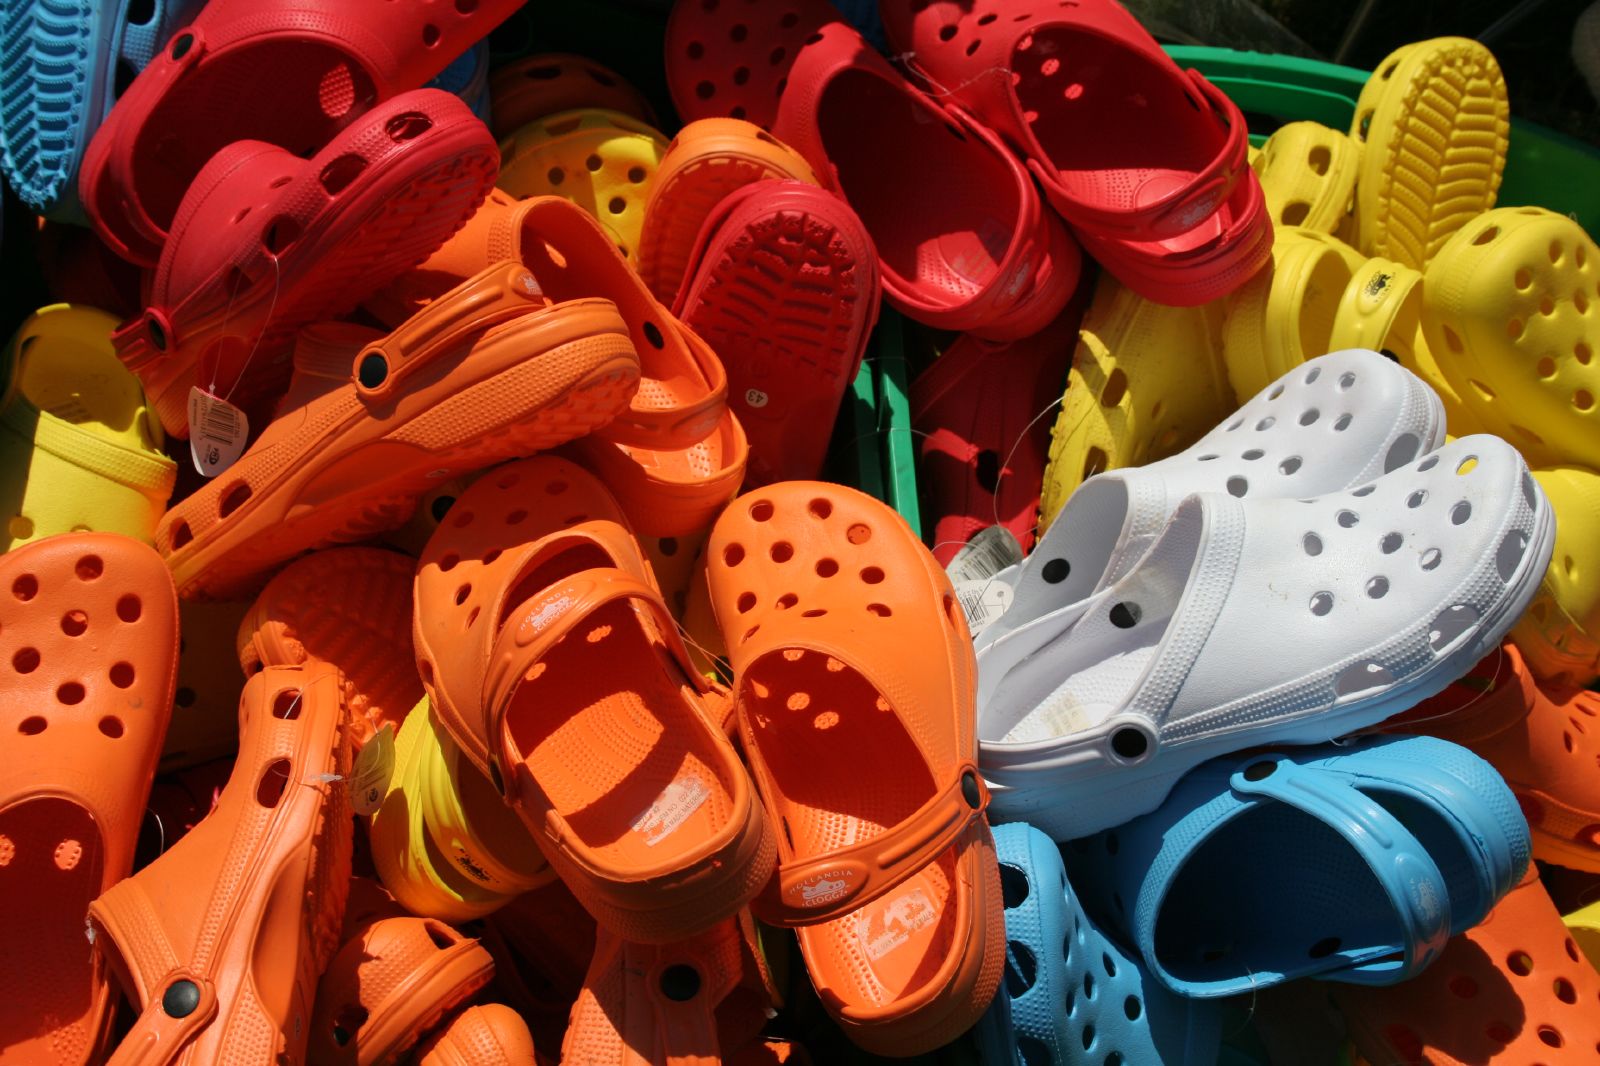 A pile of multicolored classic Crocs shoes